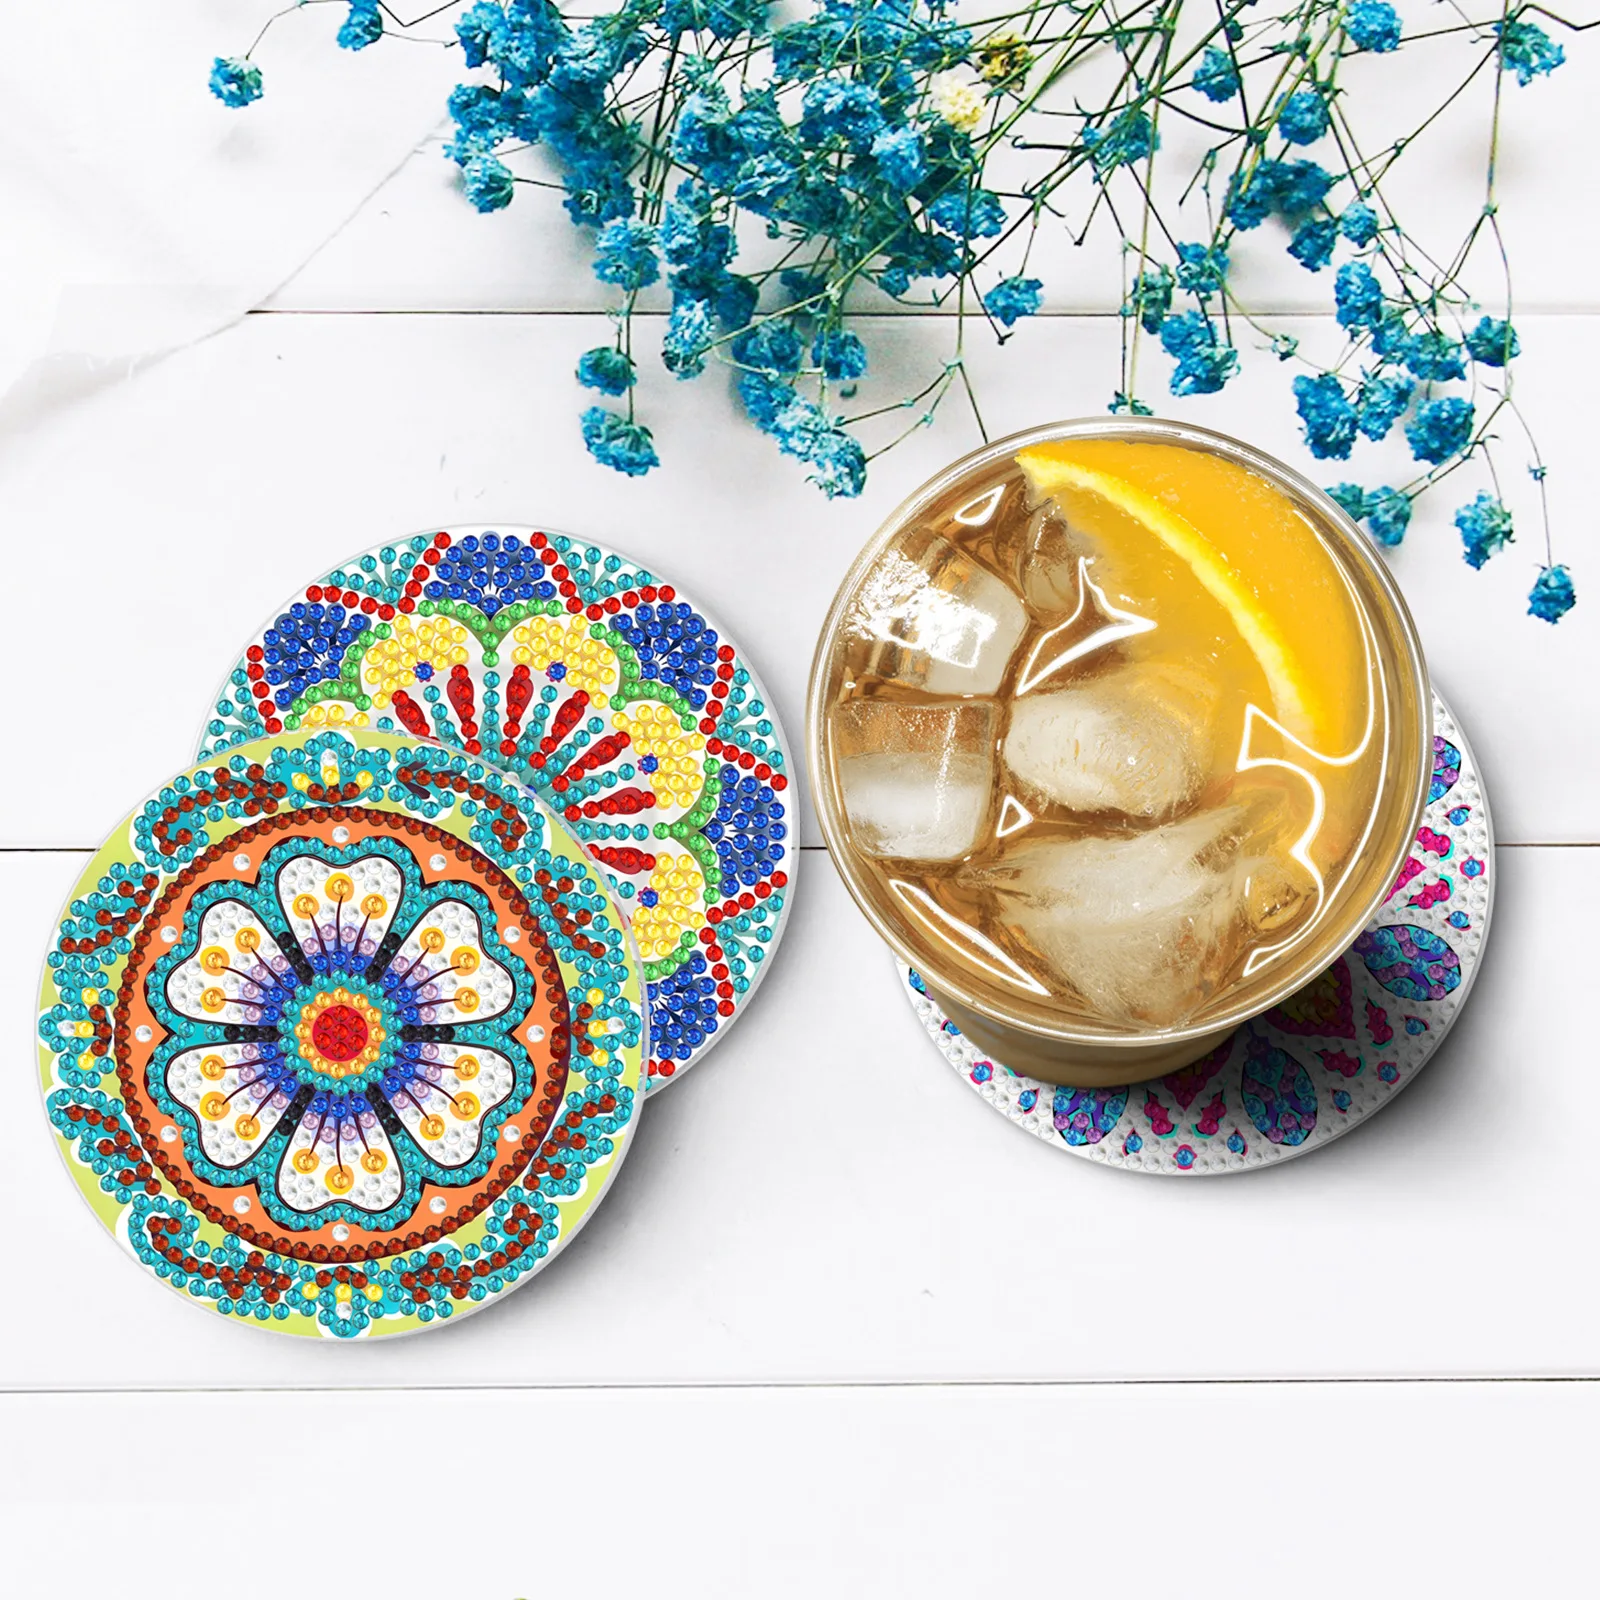 

8pcs/set DIY Diamond Painting Coaster With Holder Mandala Drink Cup Cushion Non-slip Table Placemat Insulation Pad Home Decor